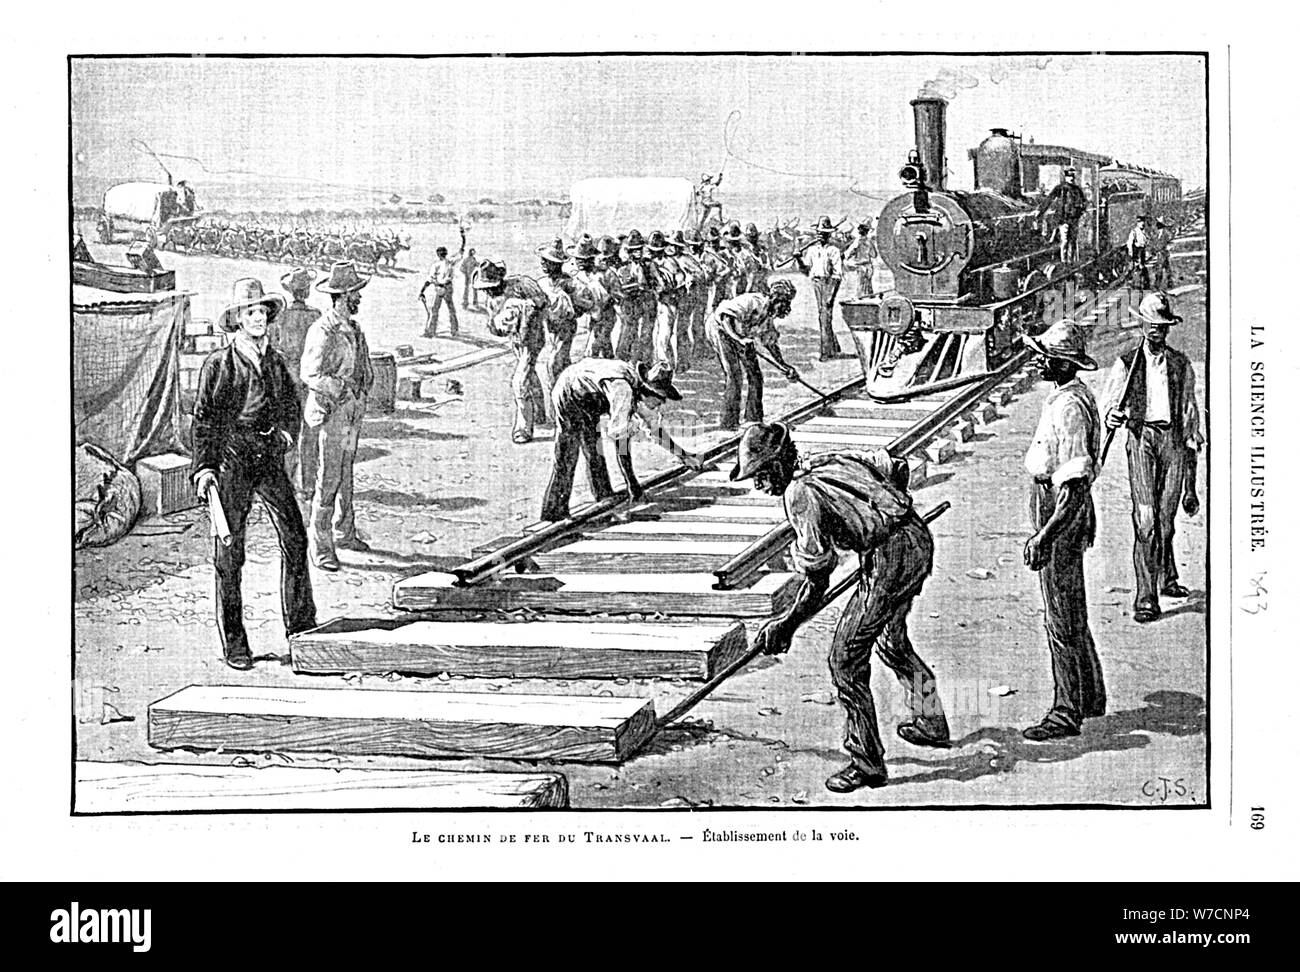 Laying sleepers and rails (permanent way) on the Transvaal Railway, South Africa, 1893. Artist: Unknown Stock Photo